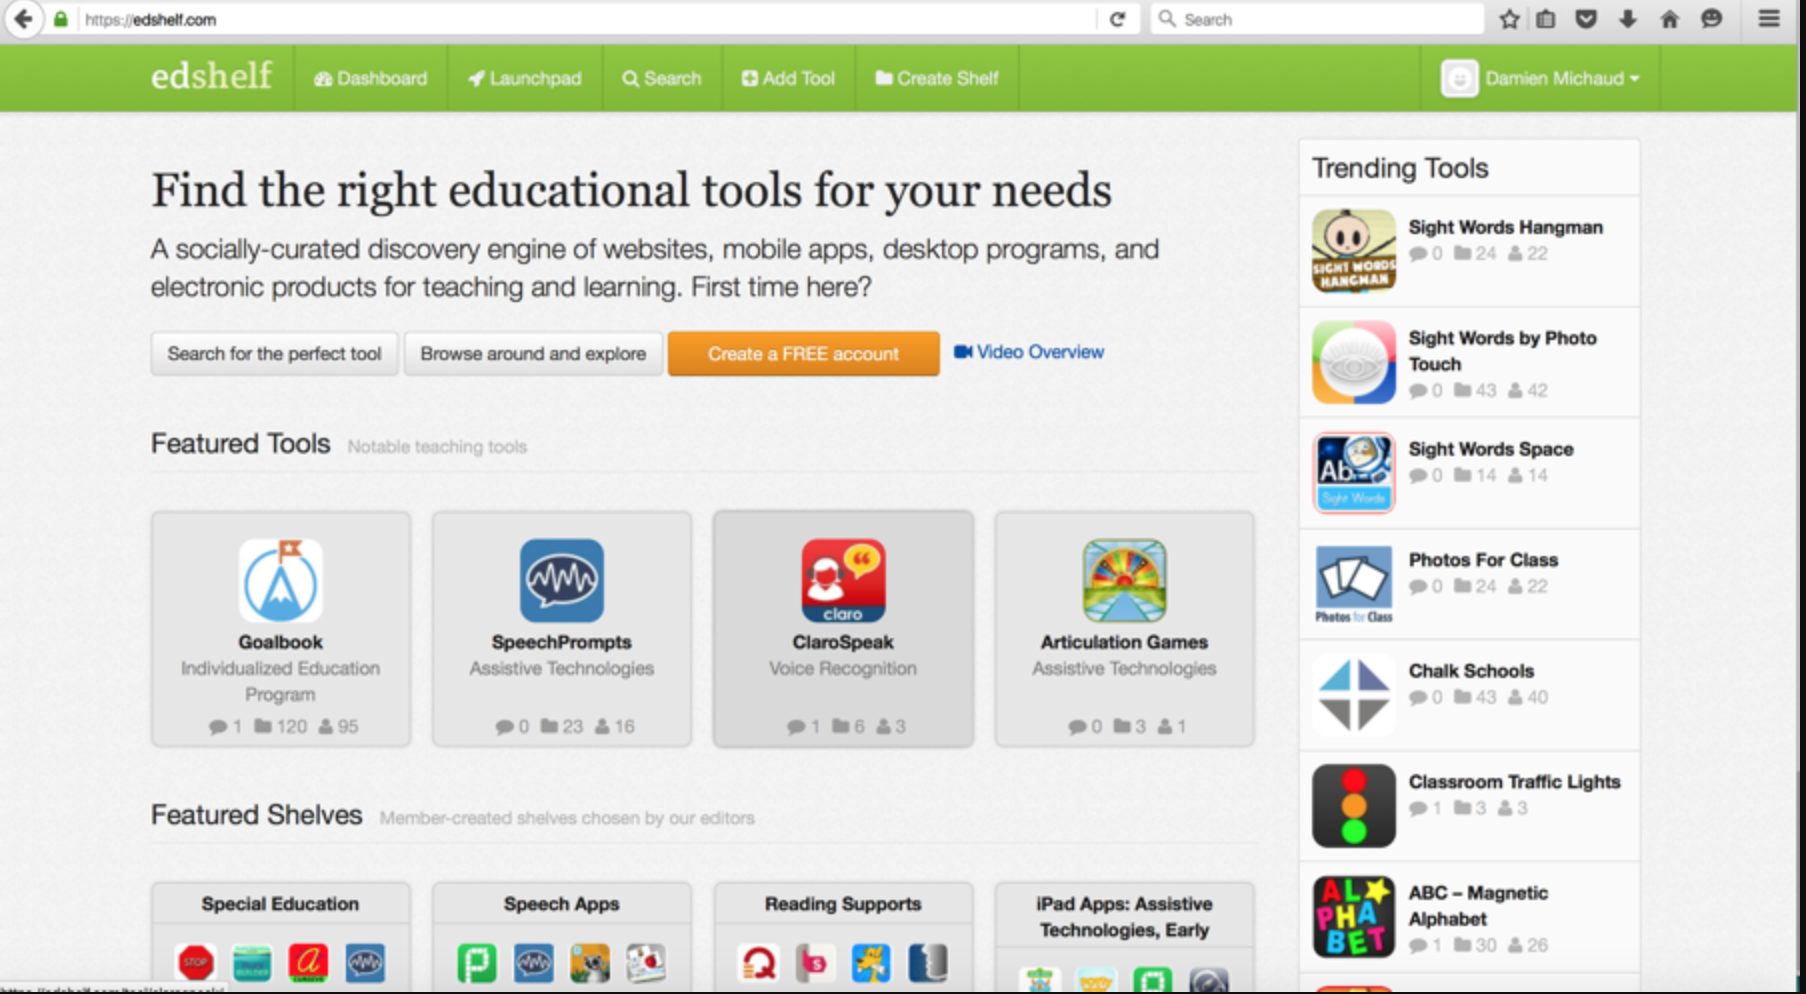 Search for the best educational tools for your needs using edshelf